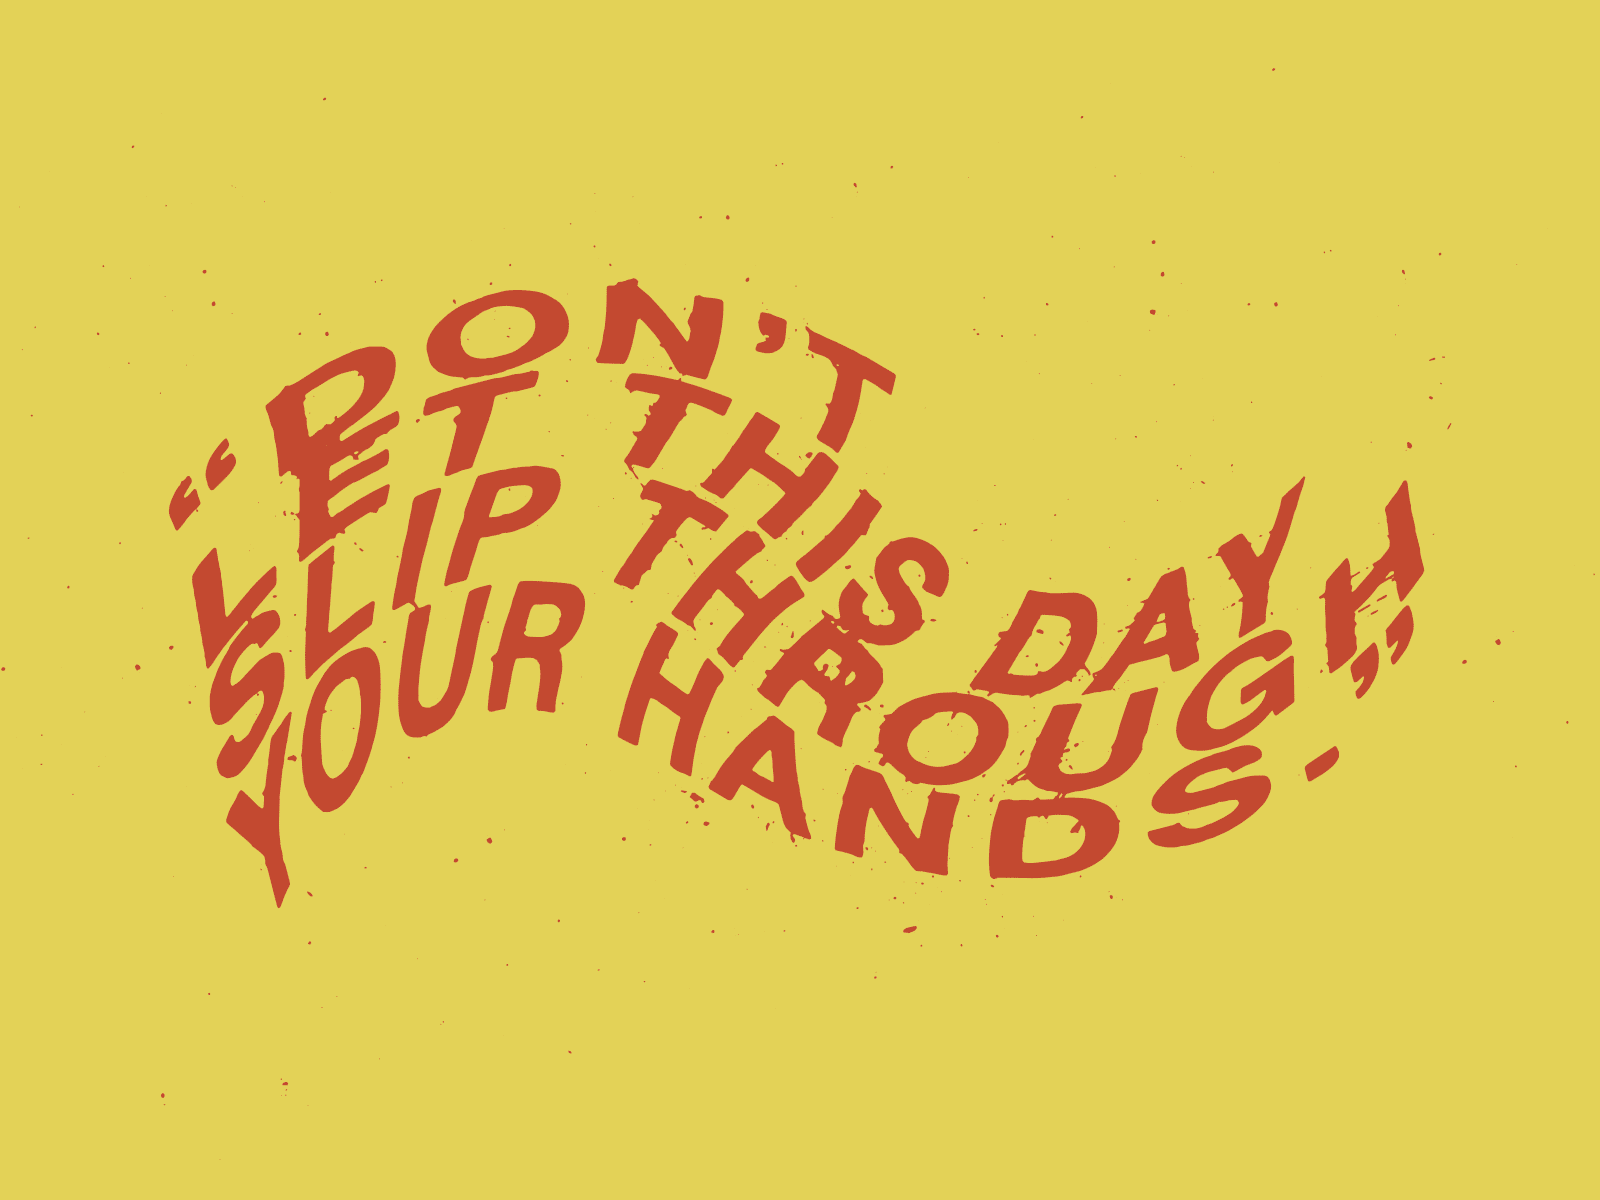 Don't let this day slip through your hands animated gif grunge seisure type typography vector